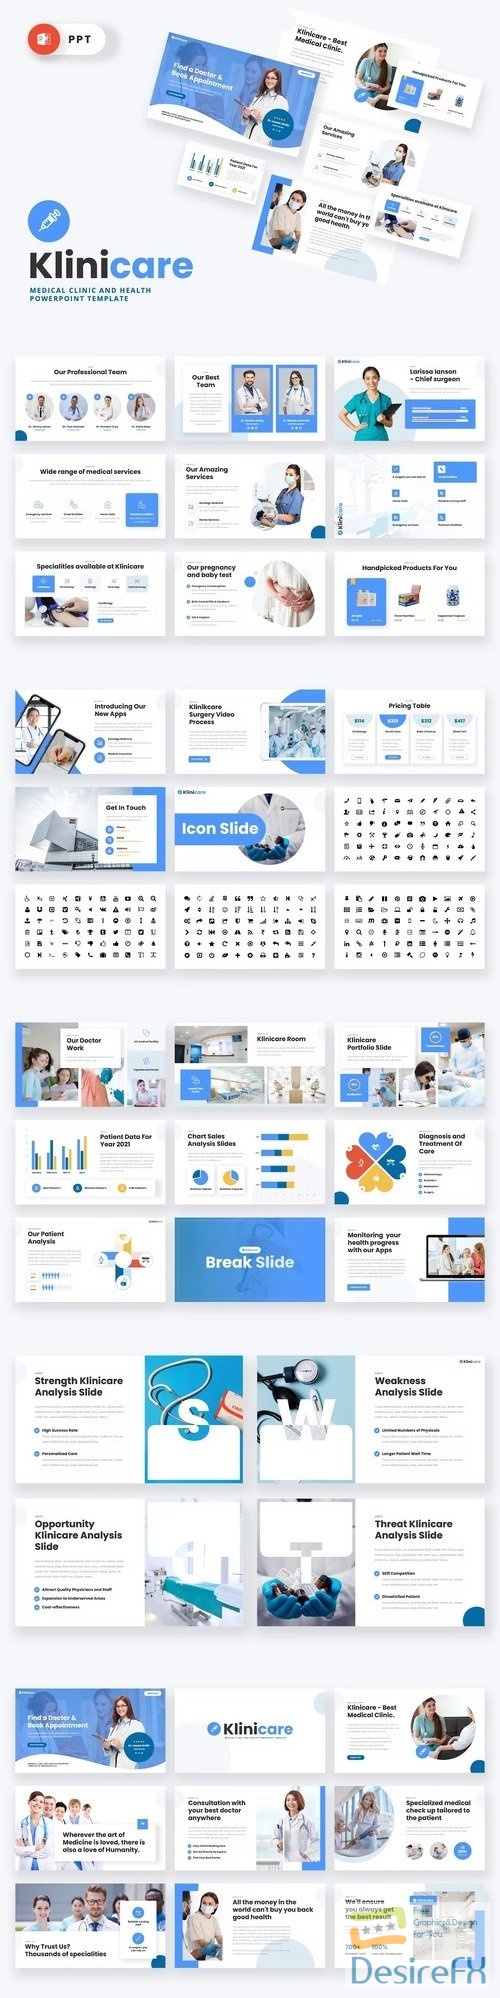 KLINICARE - Medical Clinic Powerpoint Template